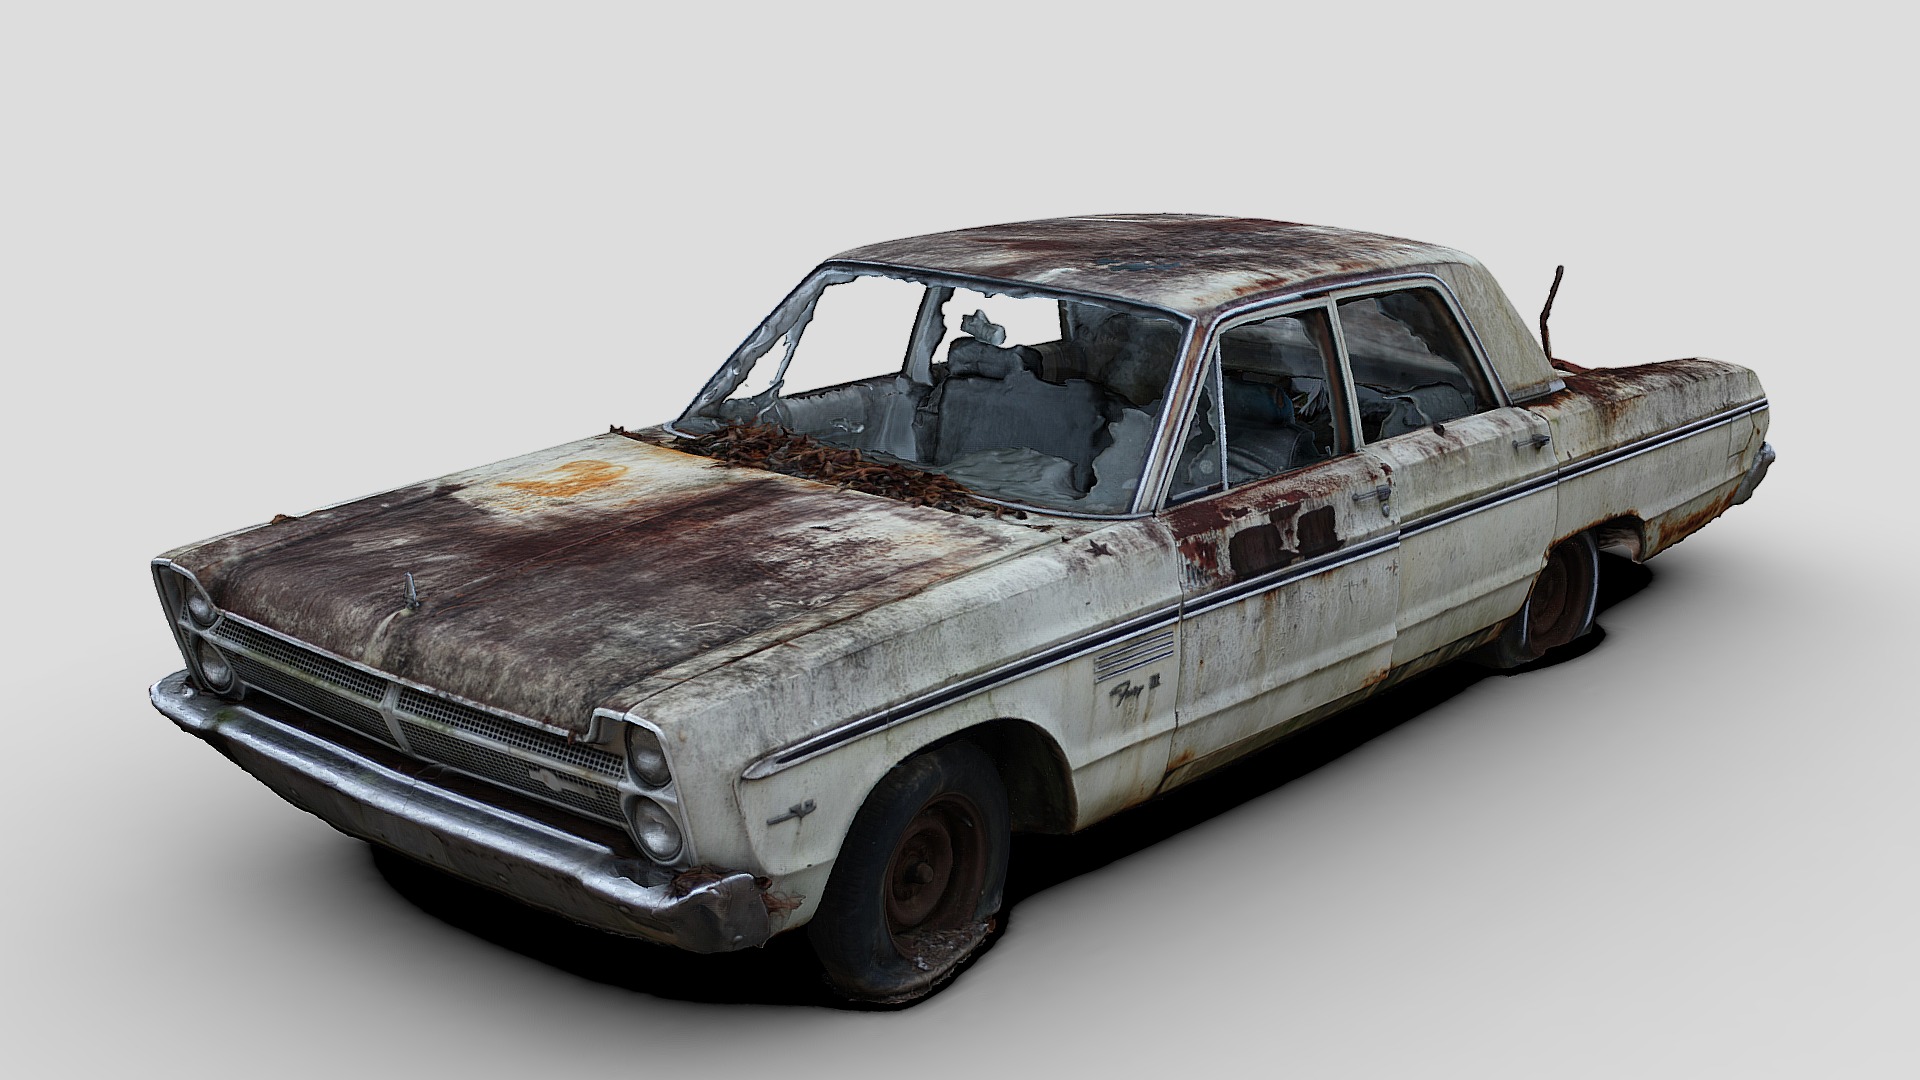 3D model Wrecked Fury II (Raw Scan) - This is a 3D model of the Wrecked Fury II (Raw Scan). The 3D model is about a car with a dent in the front.